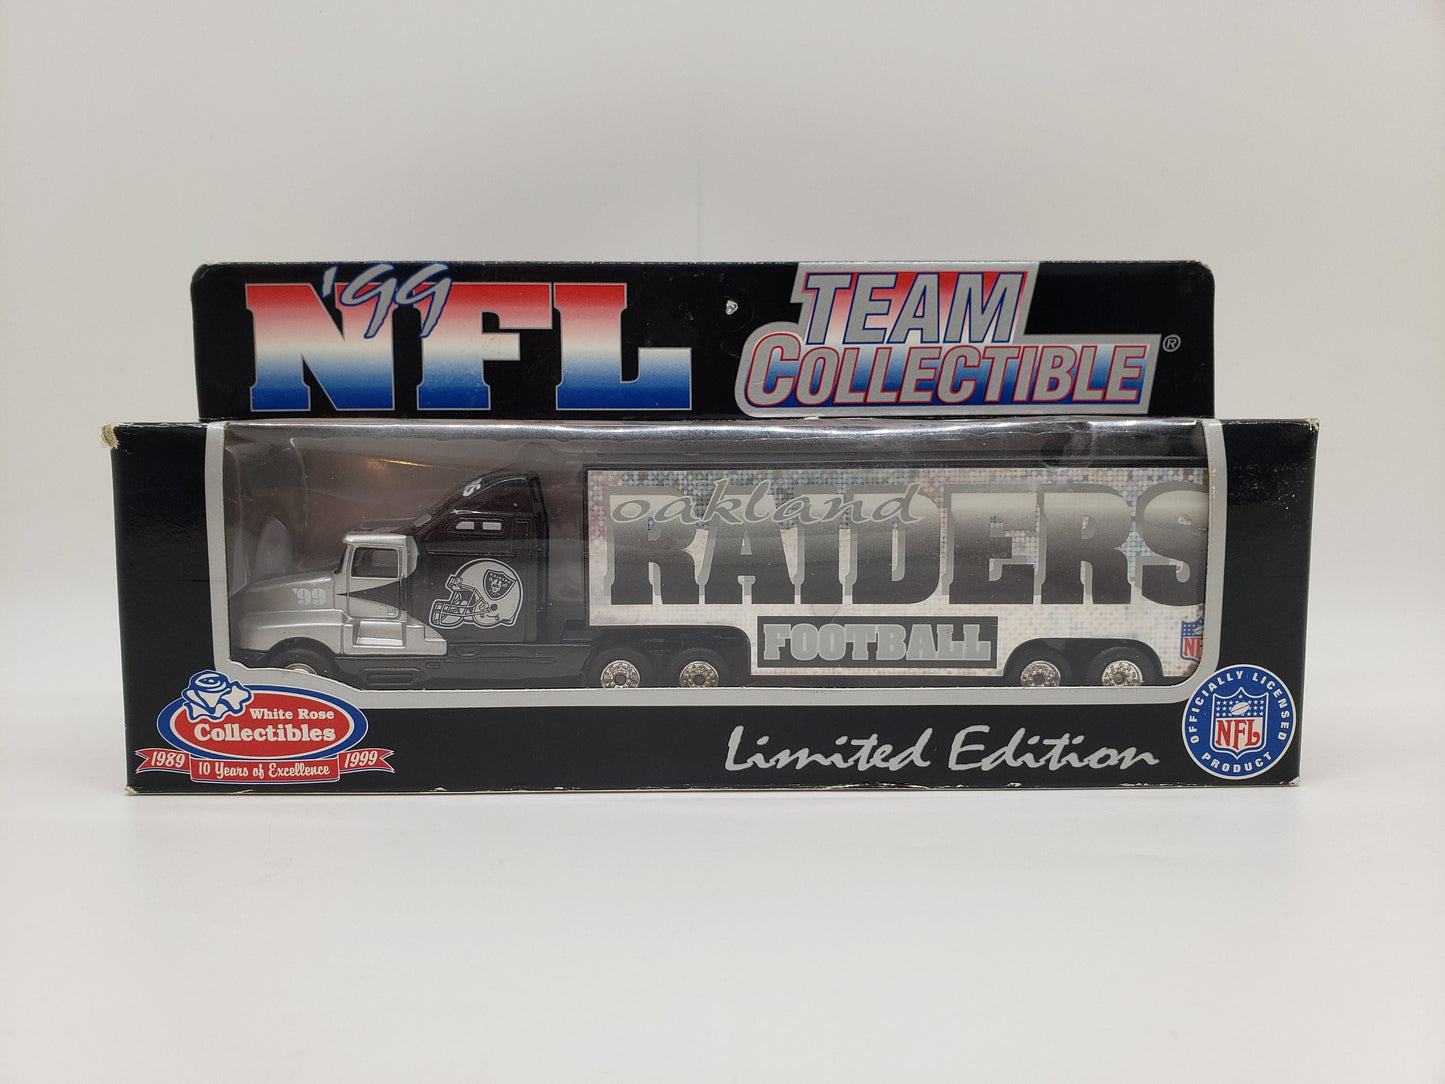 Oakland Raiders Replica Transporter Silver and Black White Rose Collectable Scale Miniature Model Toy Car Perfect Birthday Gift